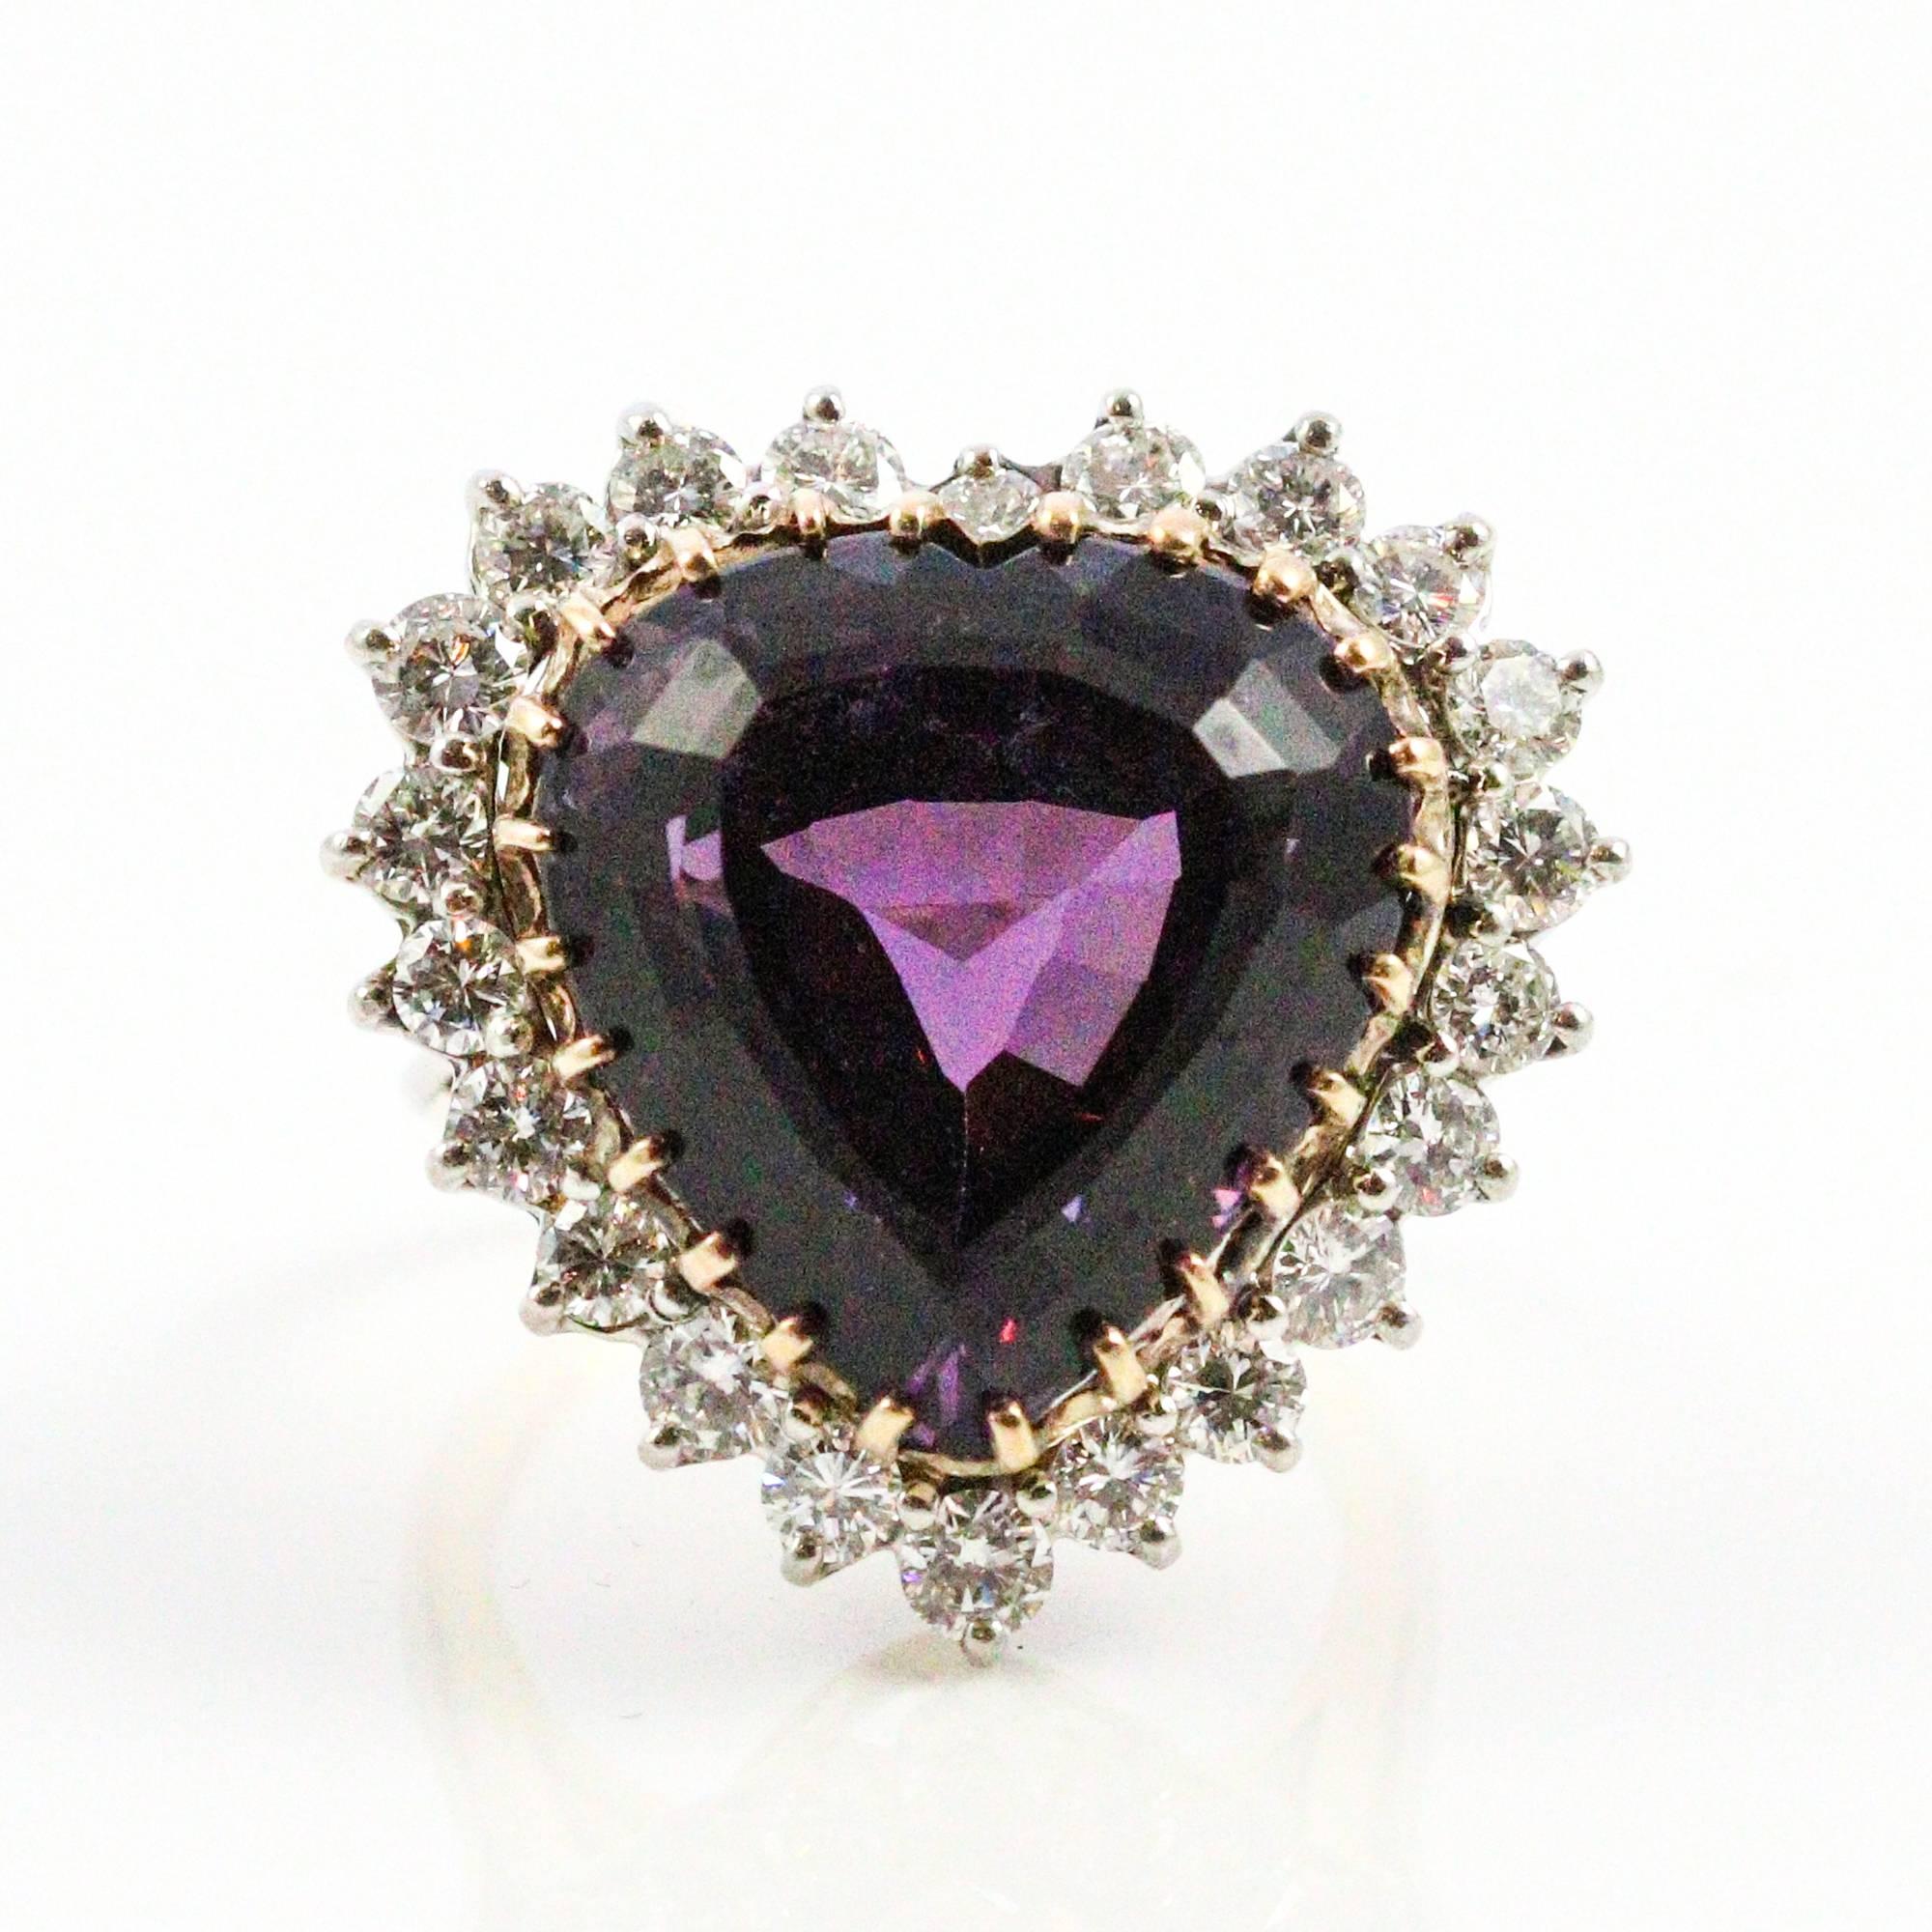 This show-stopping ring centers a heart shaped amethyst, which measures 19 x 13mm and weighs approximately 12 carats. The stone is set in 14k yellow gold with a halo of 22 round brilliant cut diamonds set in white. The diamond weigh approximately 2.